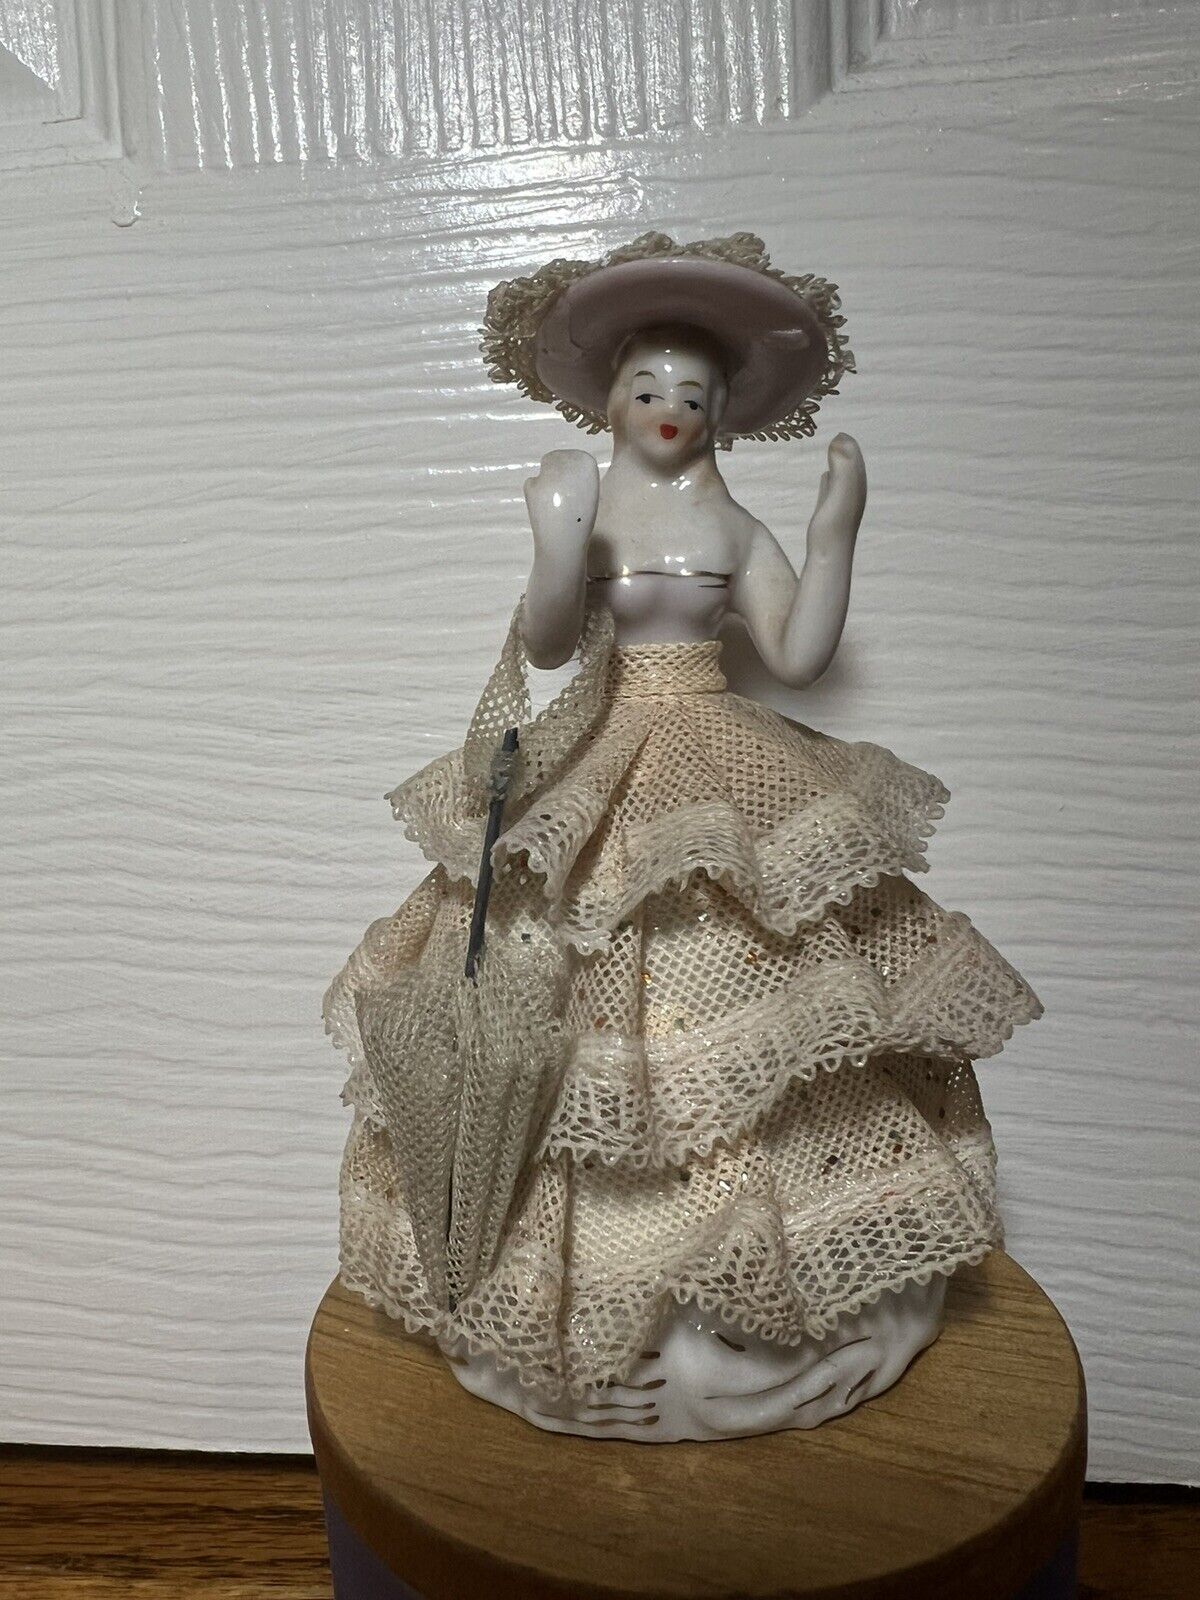 Vintage porcelain victorian lady figurine in stiffened lace dress